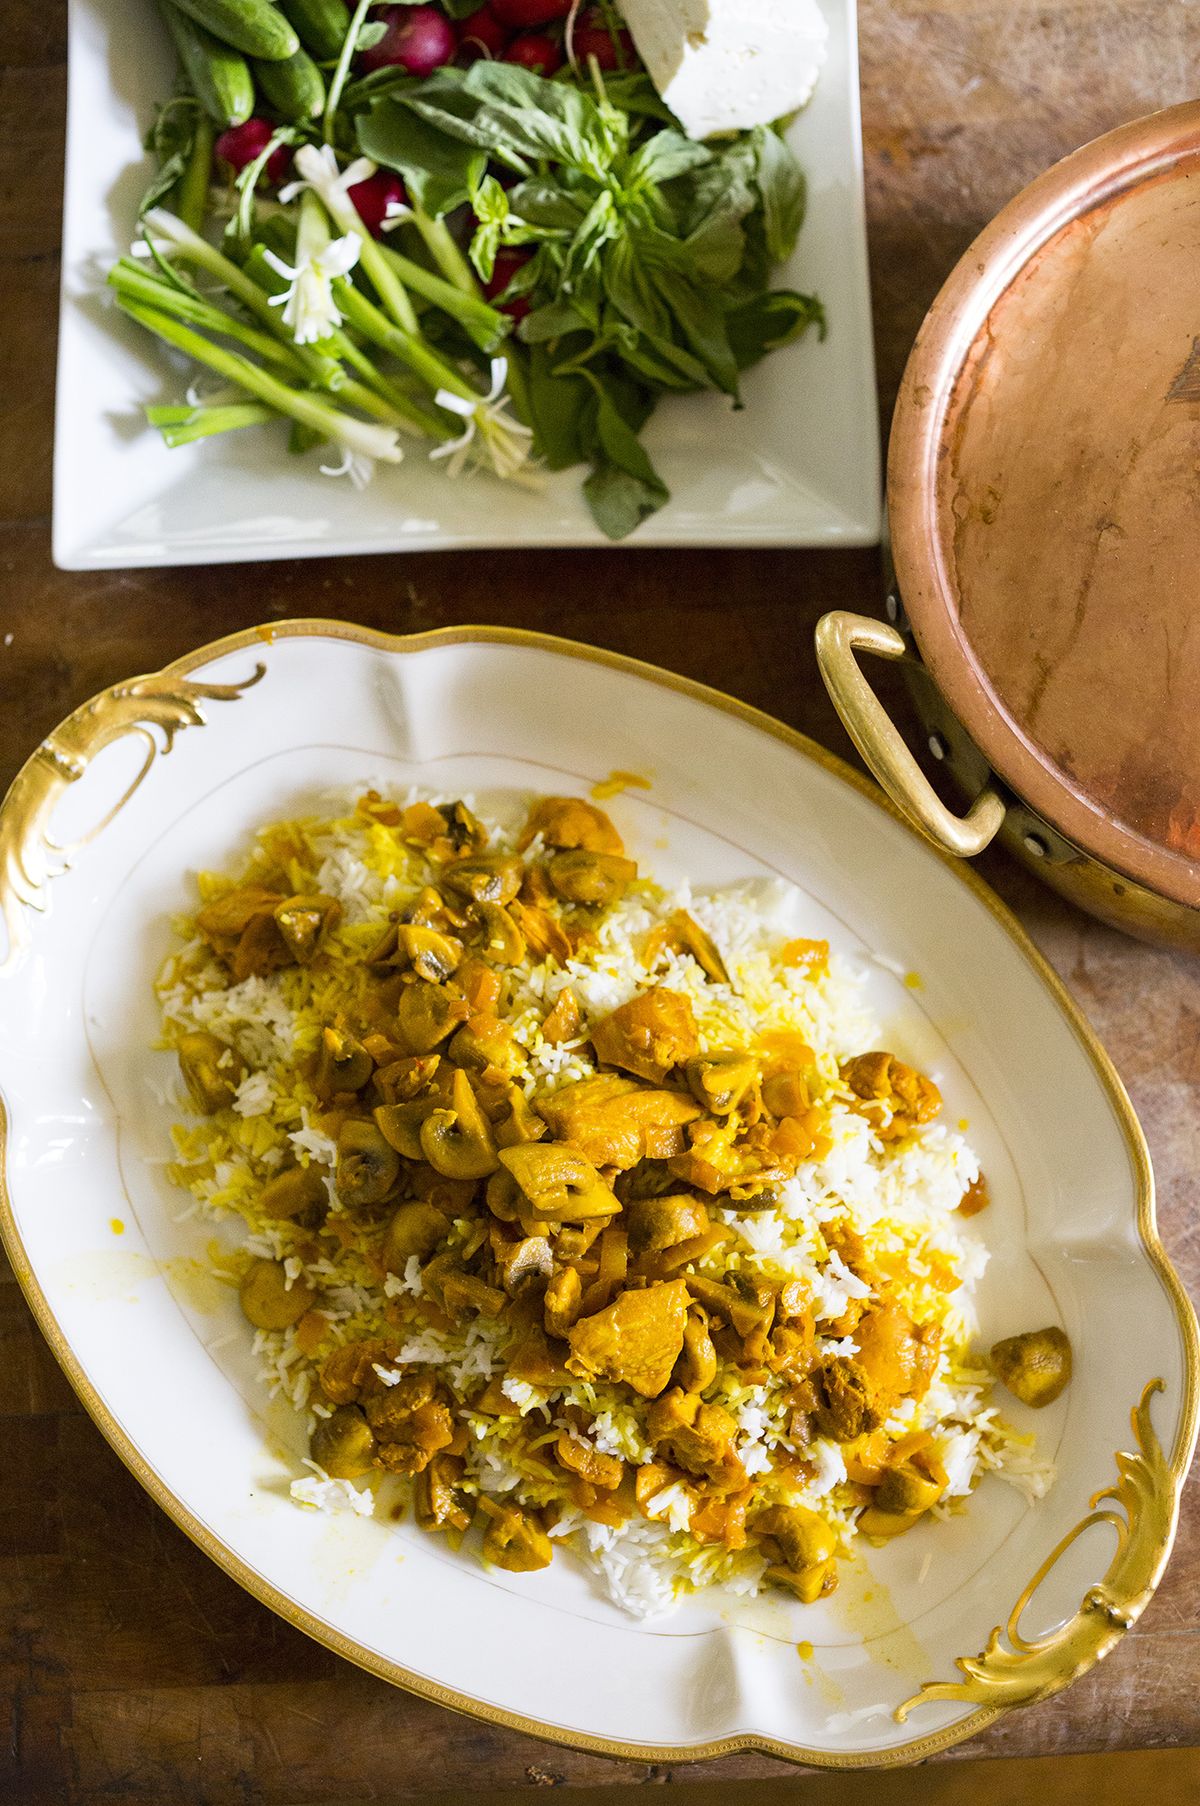 Topped over Persian steamed rice, Persian mushroom and saffron stew is a delicious mix. (Sylvia Fountaine)